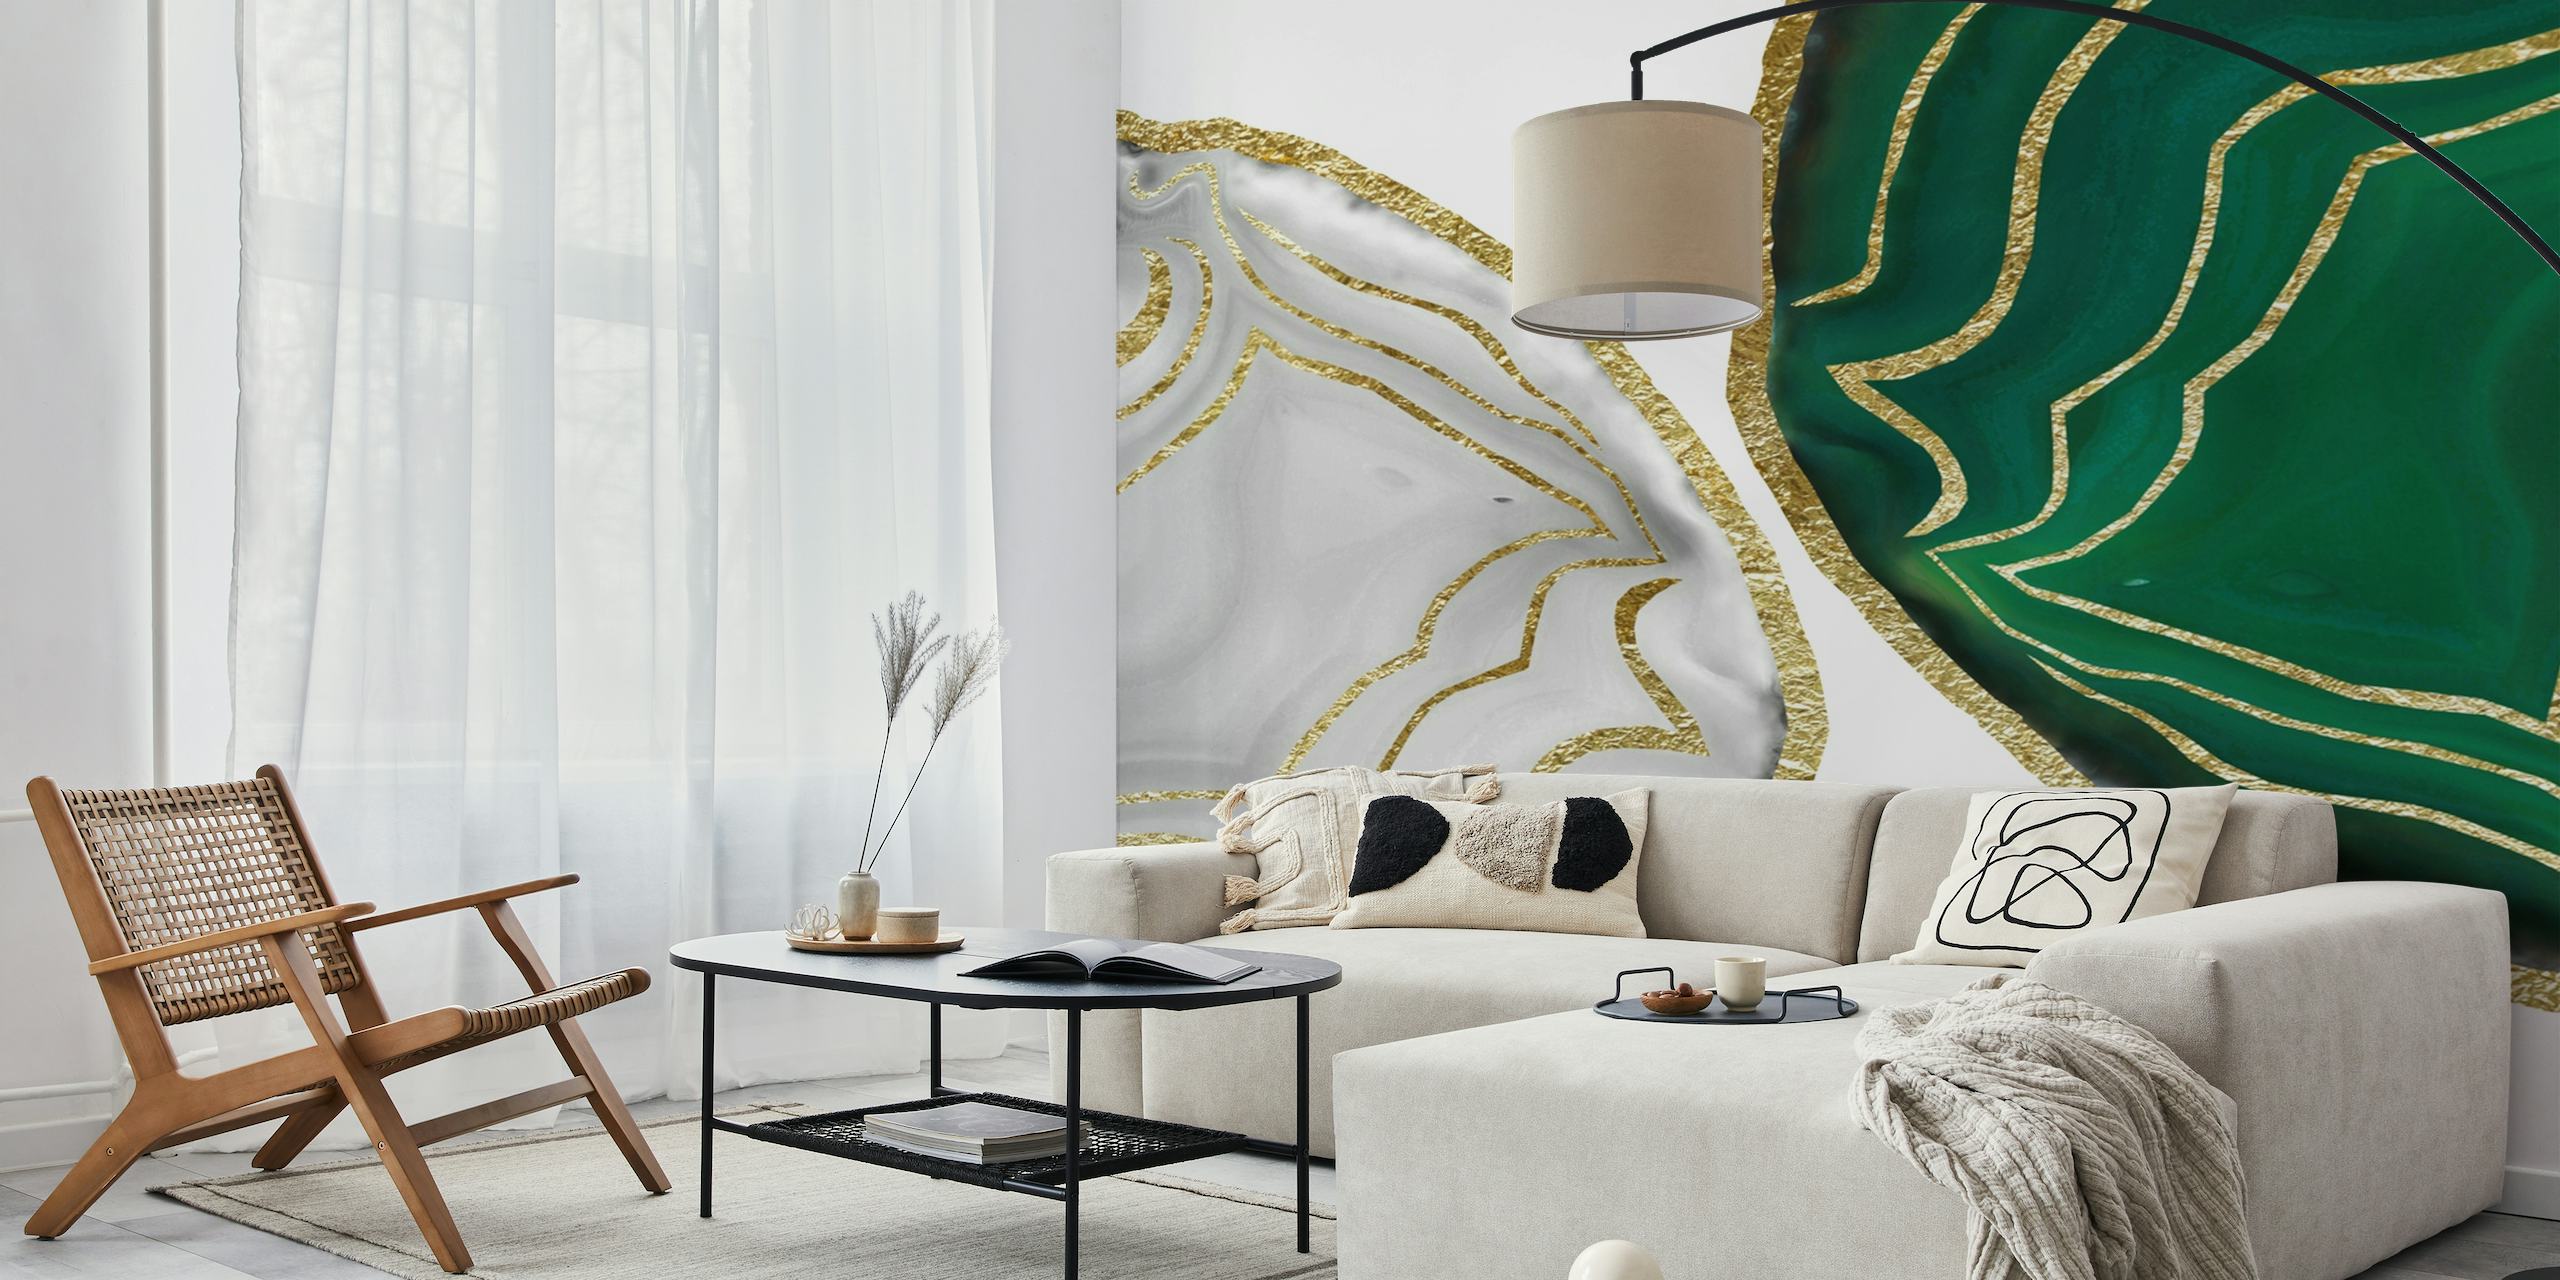 Emerald green and white agate-inspired yin-yang wall mural with gold accents